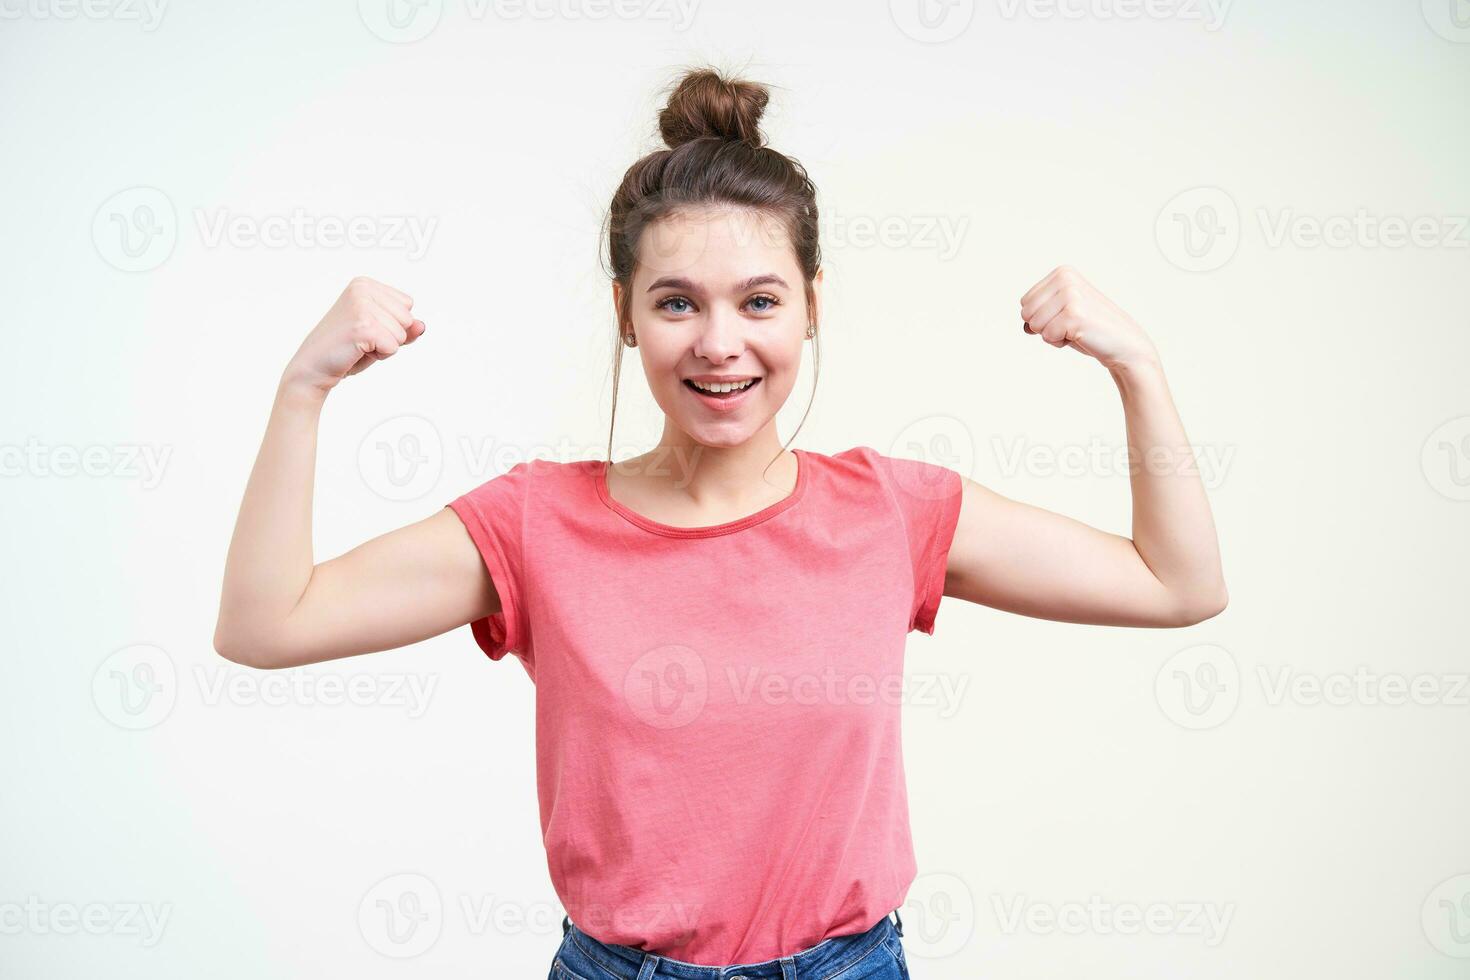 Cheerful young attractive brown haired woman with natural makeup raising her hands while showing biceps and smiling gladly at camera, isolated over white background photo